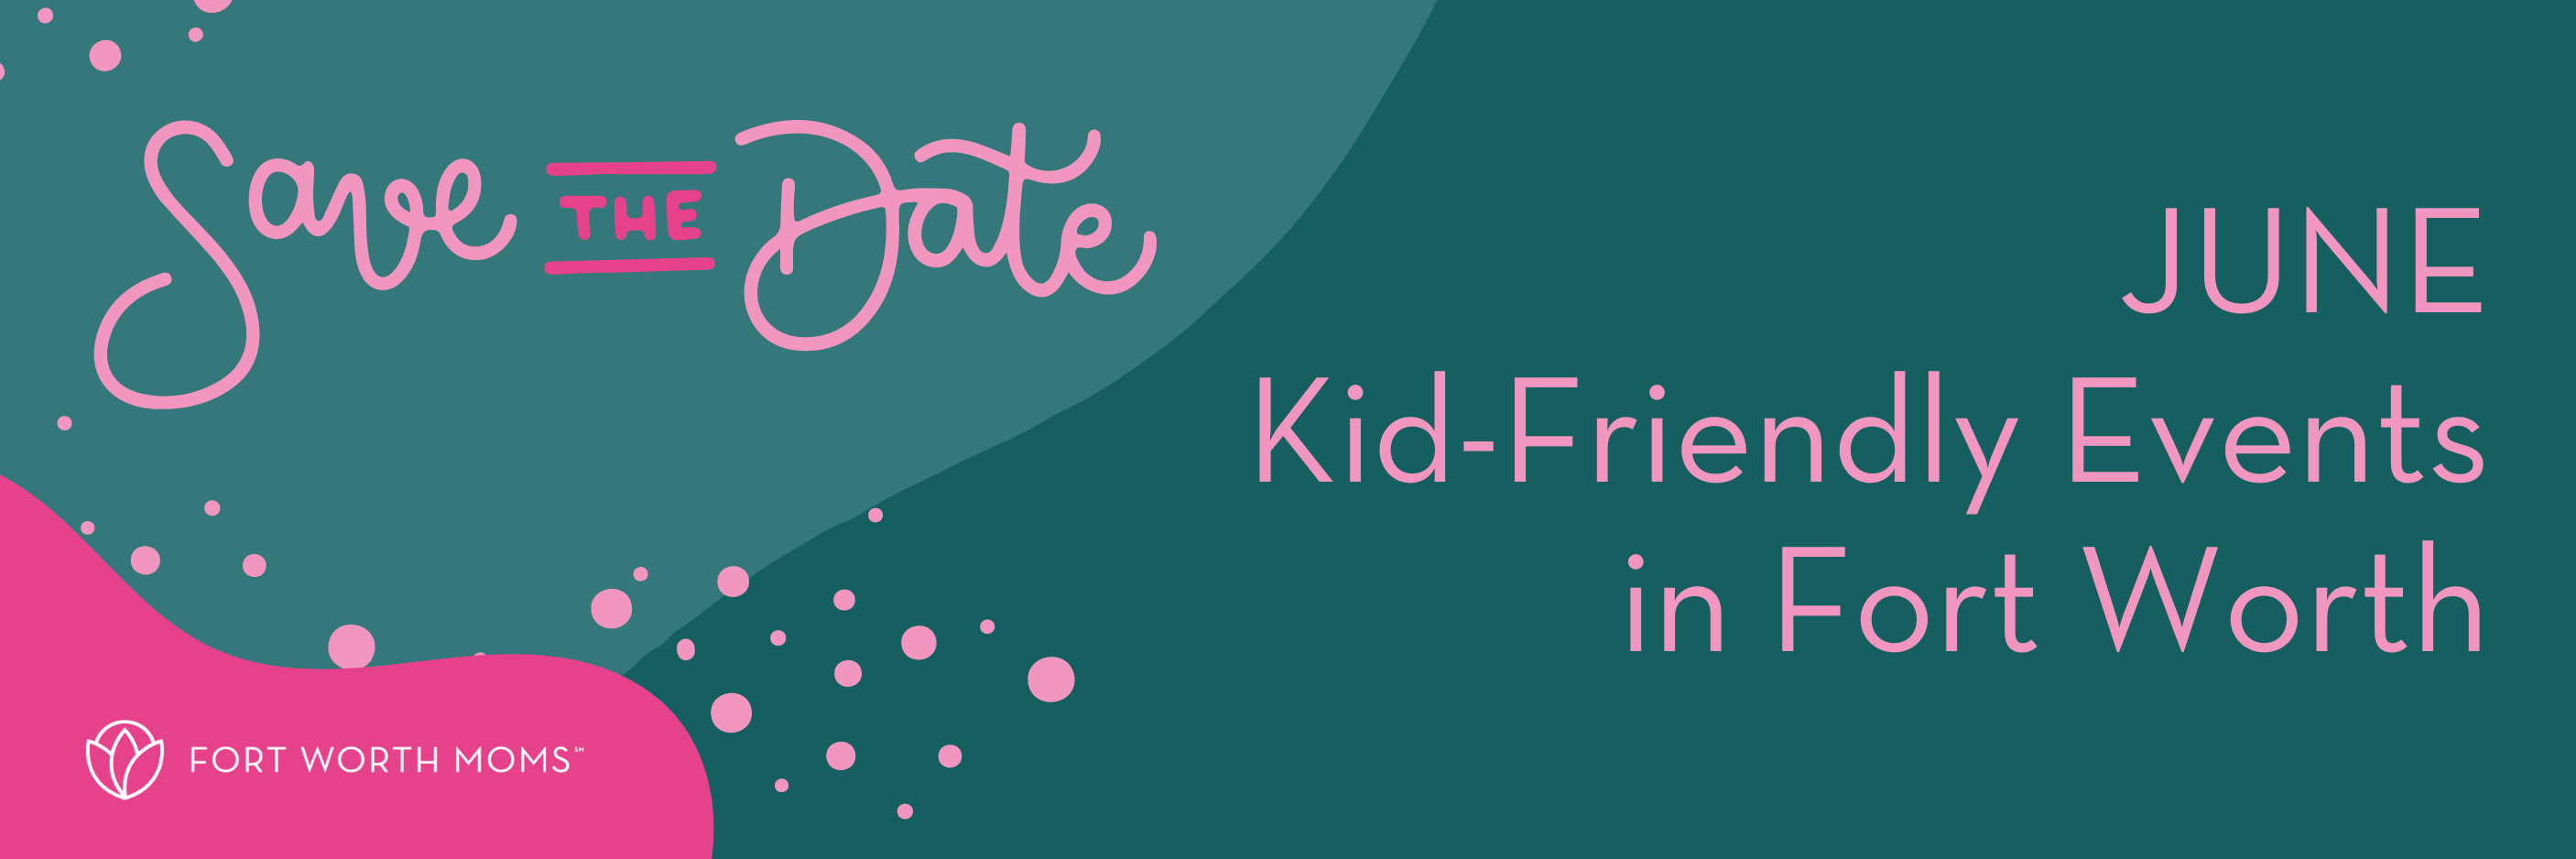 save the date june kid friendly events in fort worth